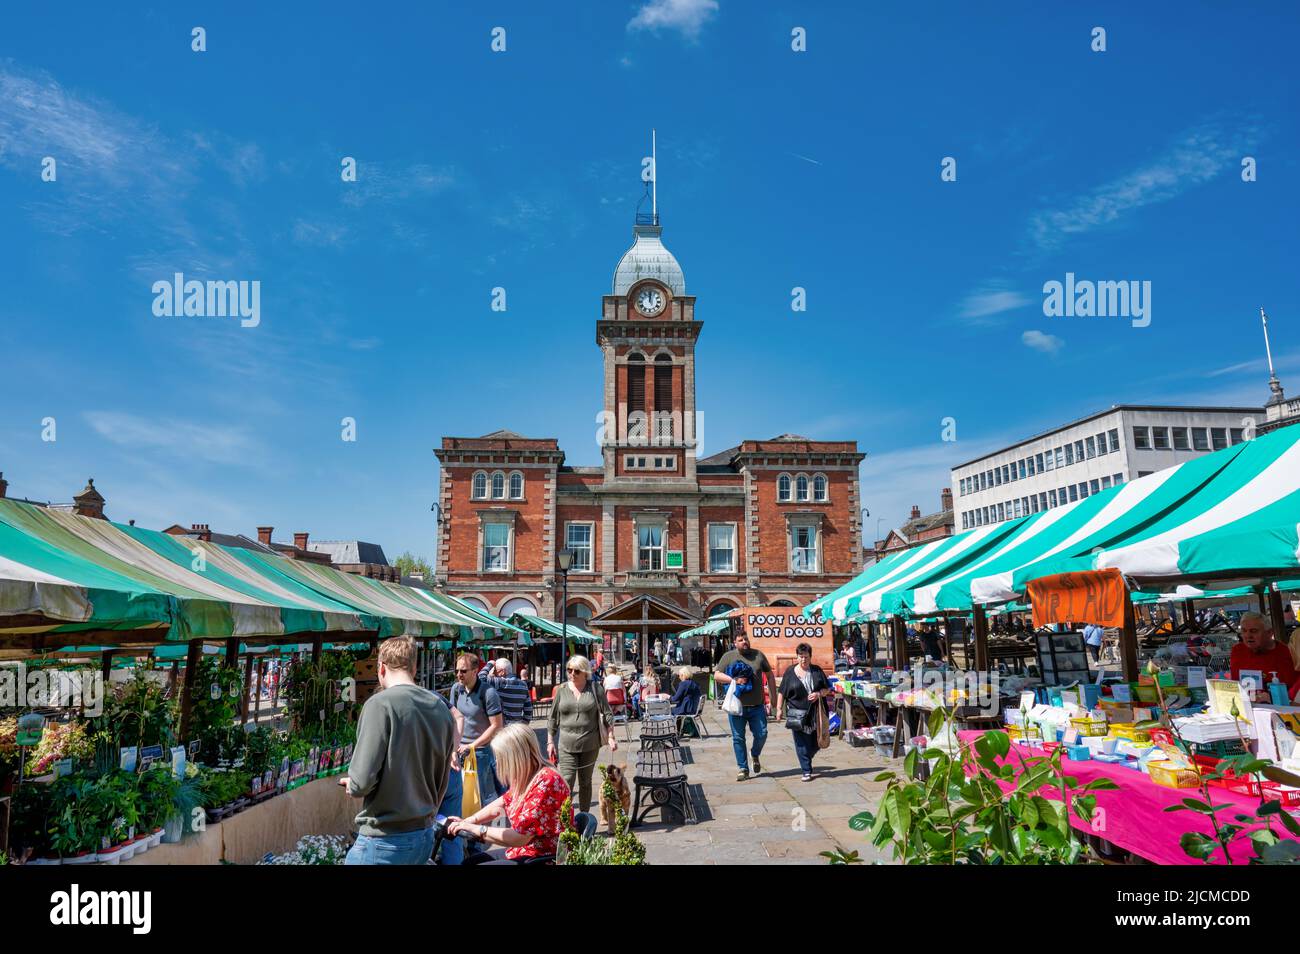 Chesterfield, UK- May 14, 2022: The outdoor market at Chesterfield England Stock Photo